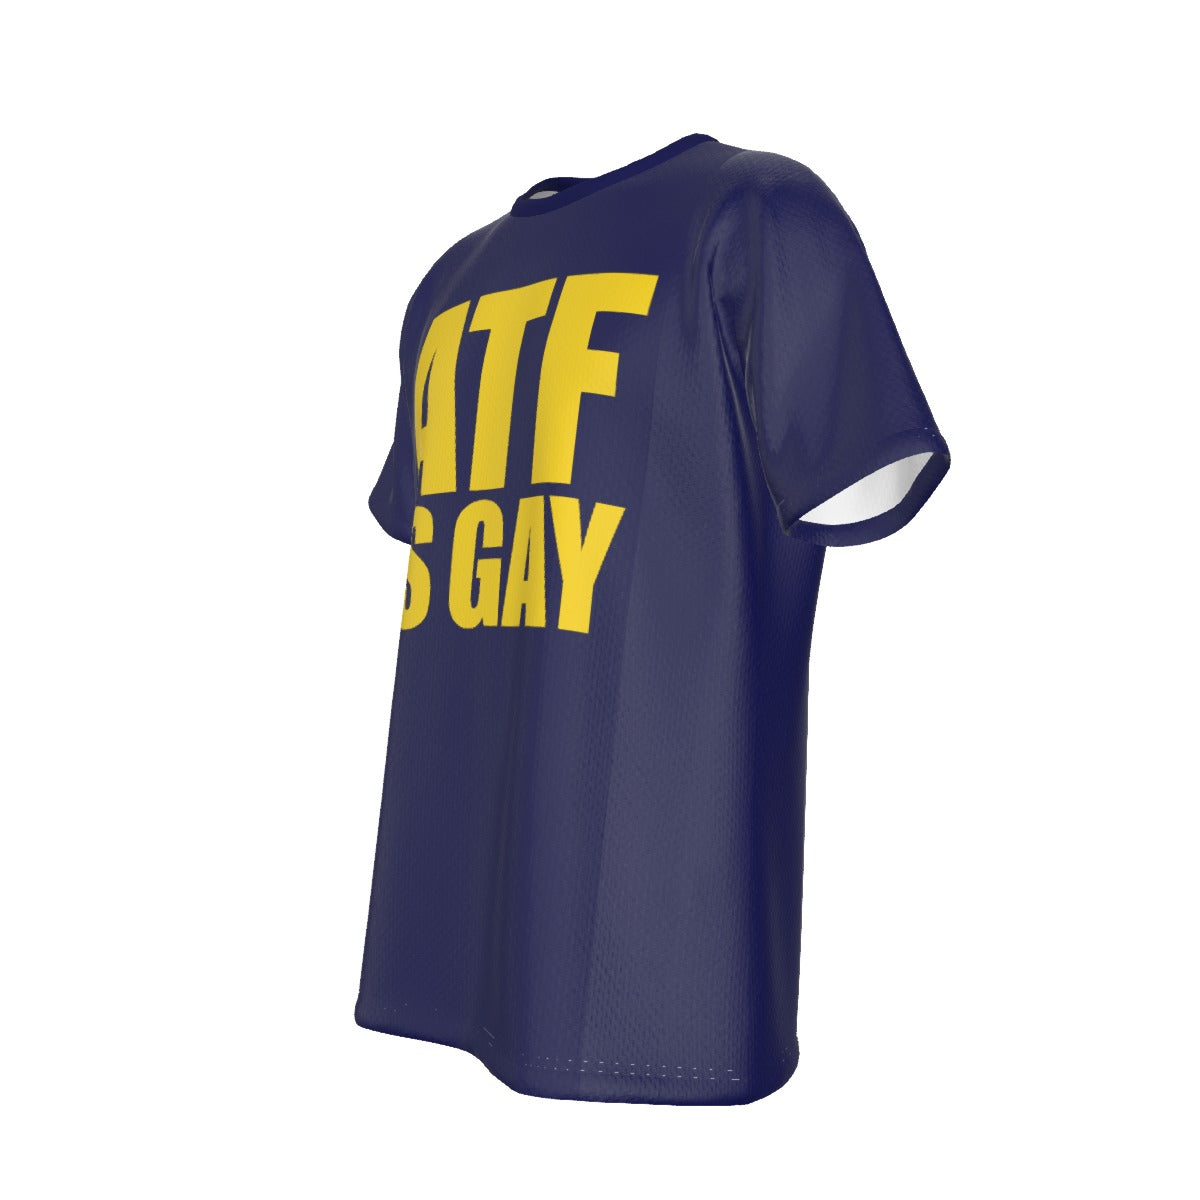 ATF Is Gay